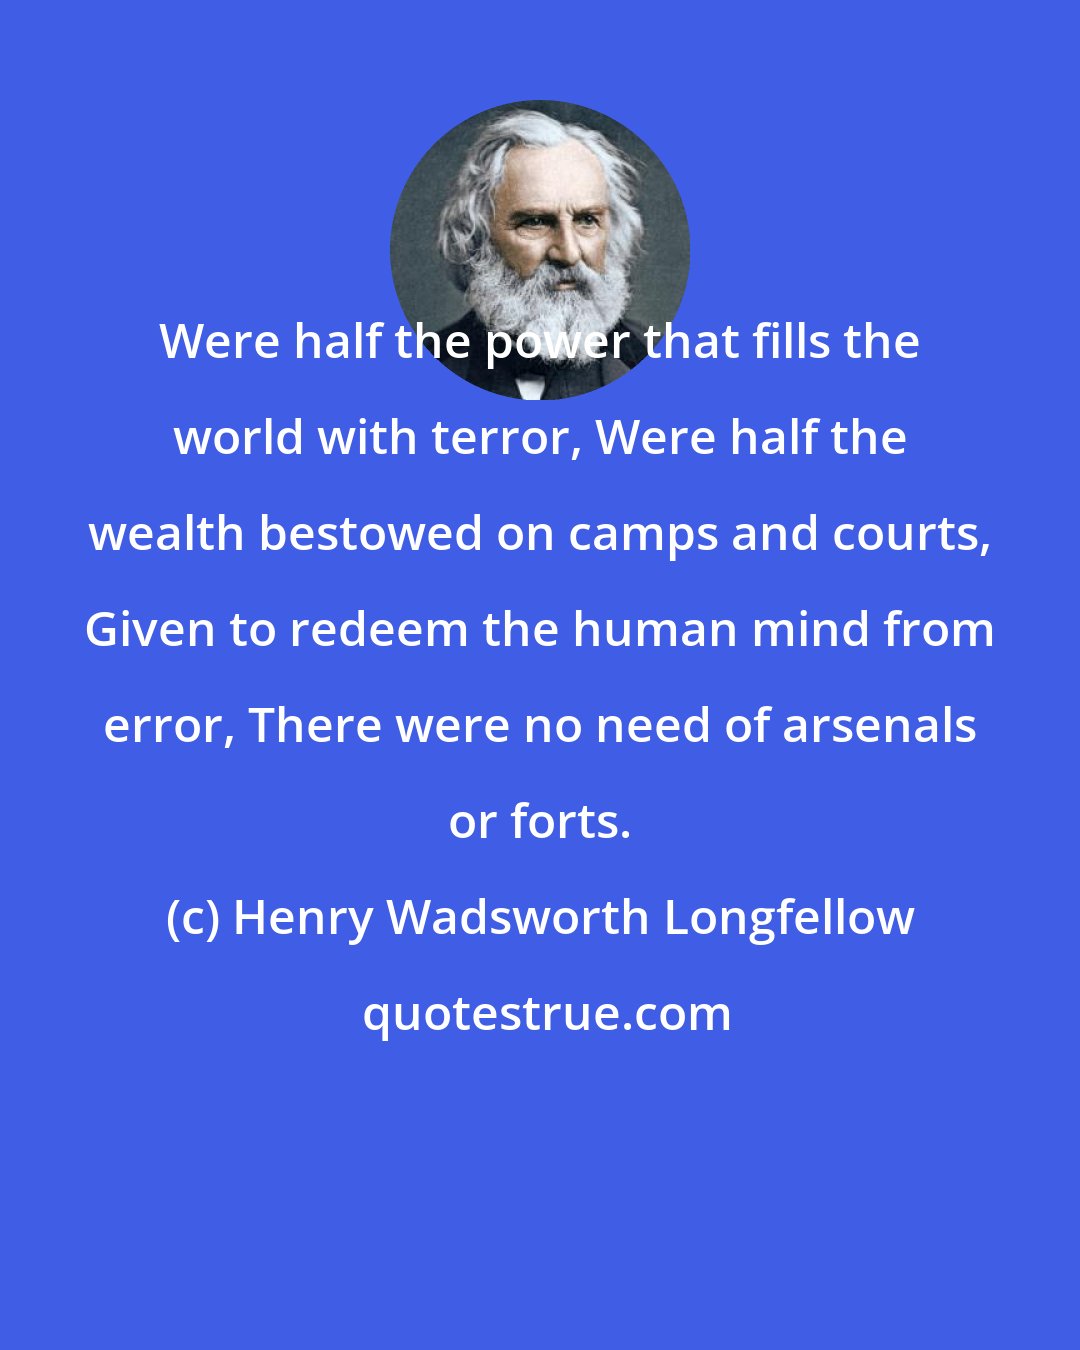 Henry Wadsworth Longfellow: Were half the power that fills the world with terror, Were half the wealth bestowed on camps and courts, Given to redeem the human mind from error, There were no need of arsenals or forts.